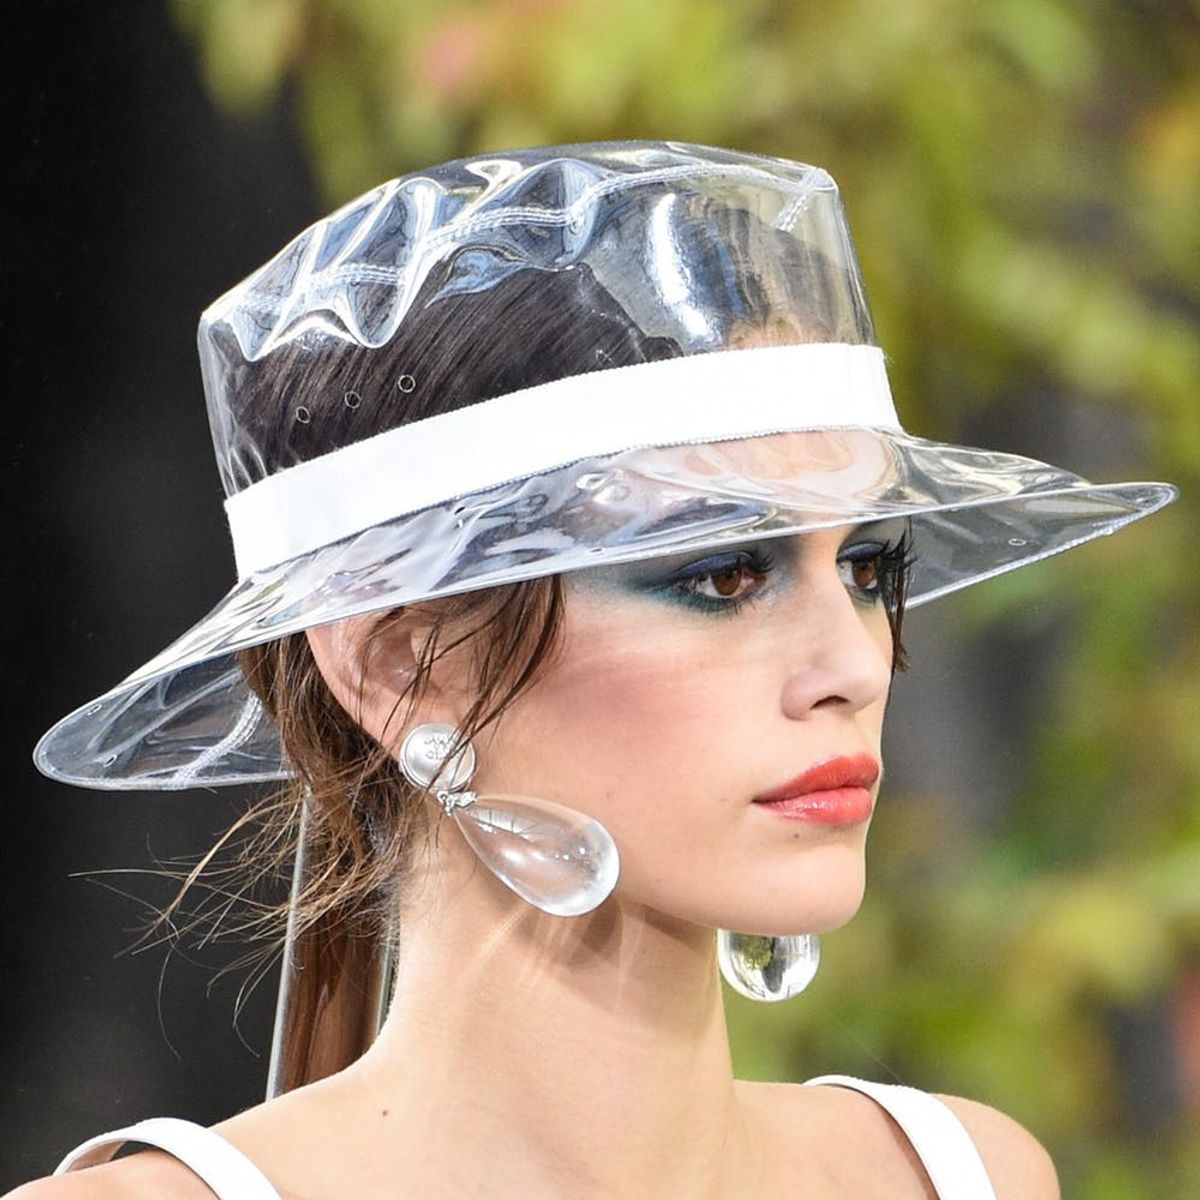 Chanel’s Plastic Rain Hats Will Cost You More Than $1K